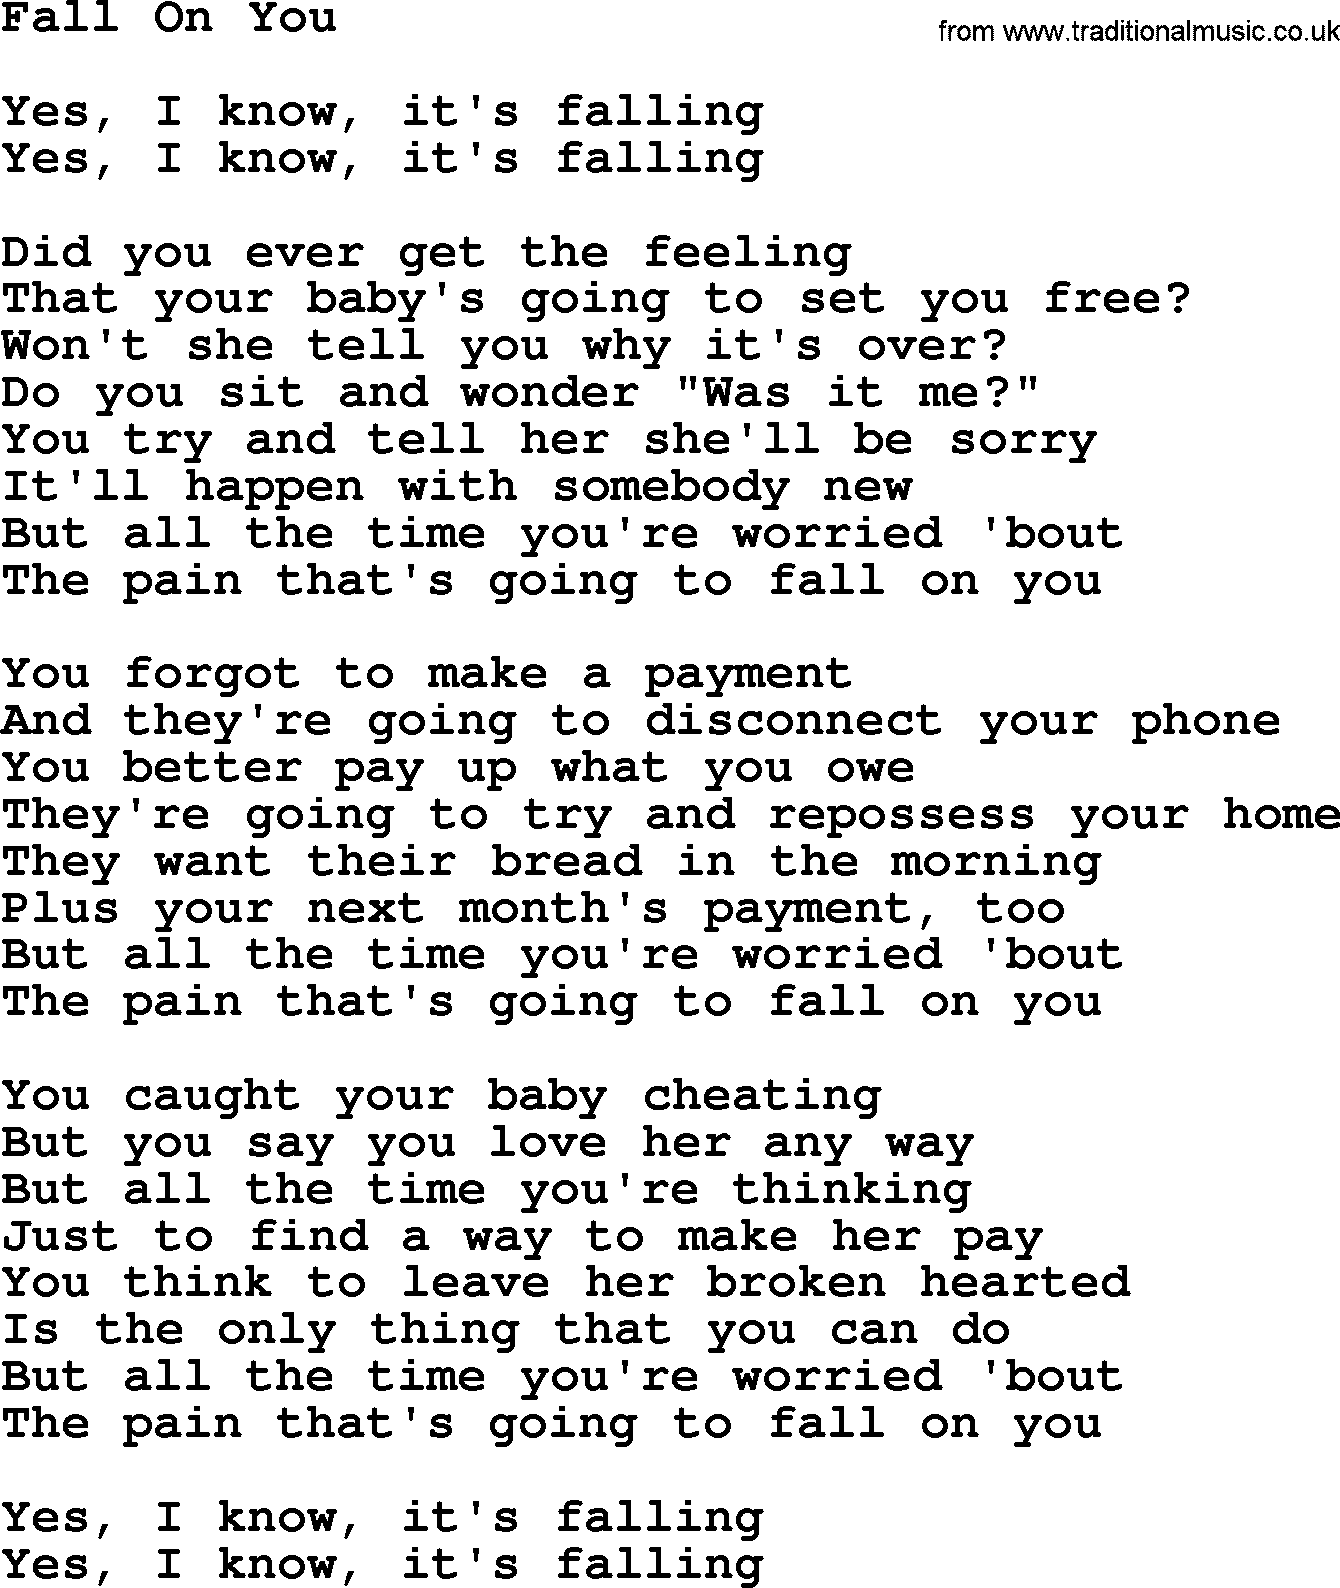 The Byrds song Fall On You, lyrics